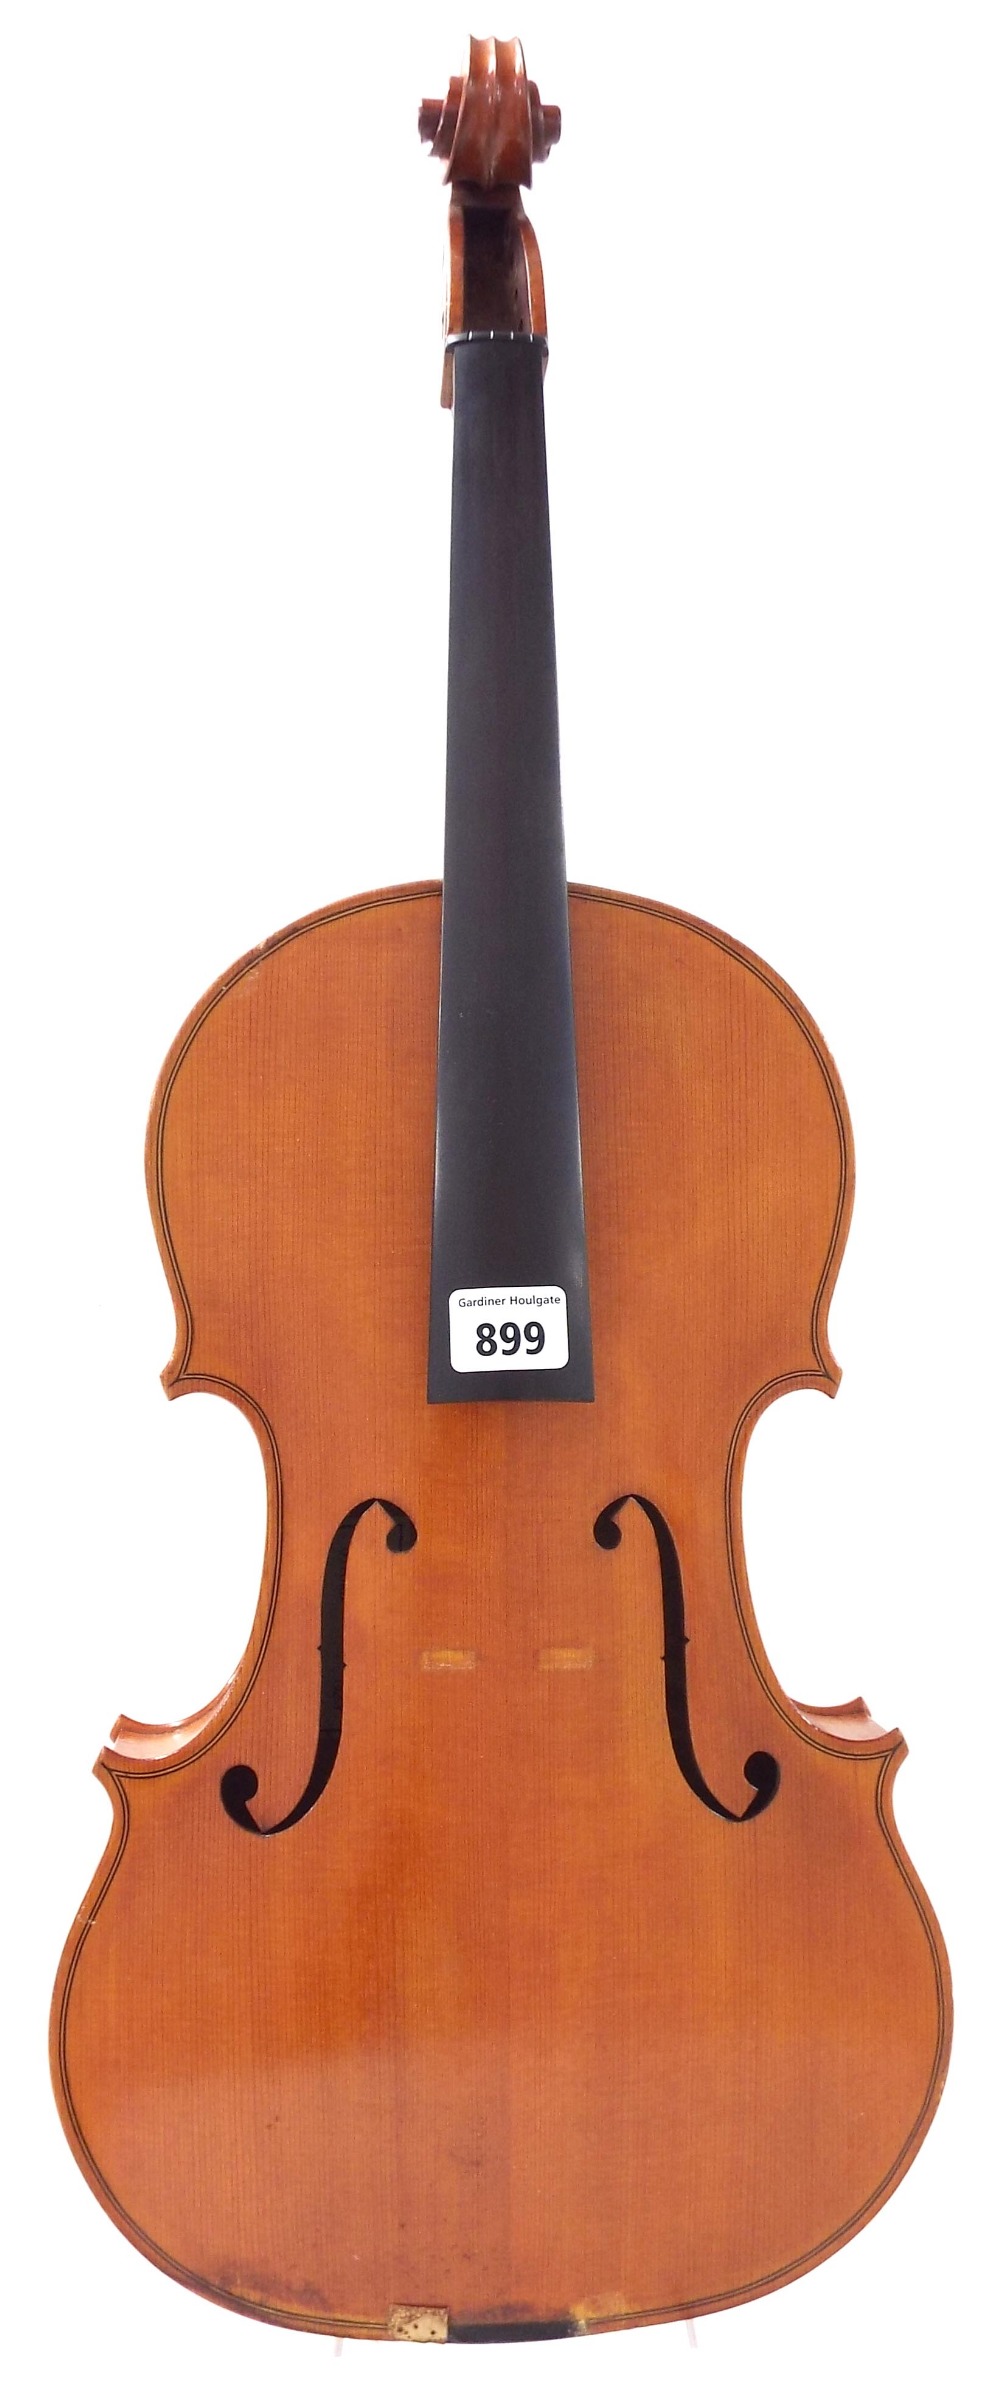 English viola by and labelled Eric William Peet, Holton, Oxford, 1968, 16 1/2", 41.90cm